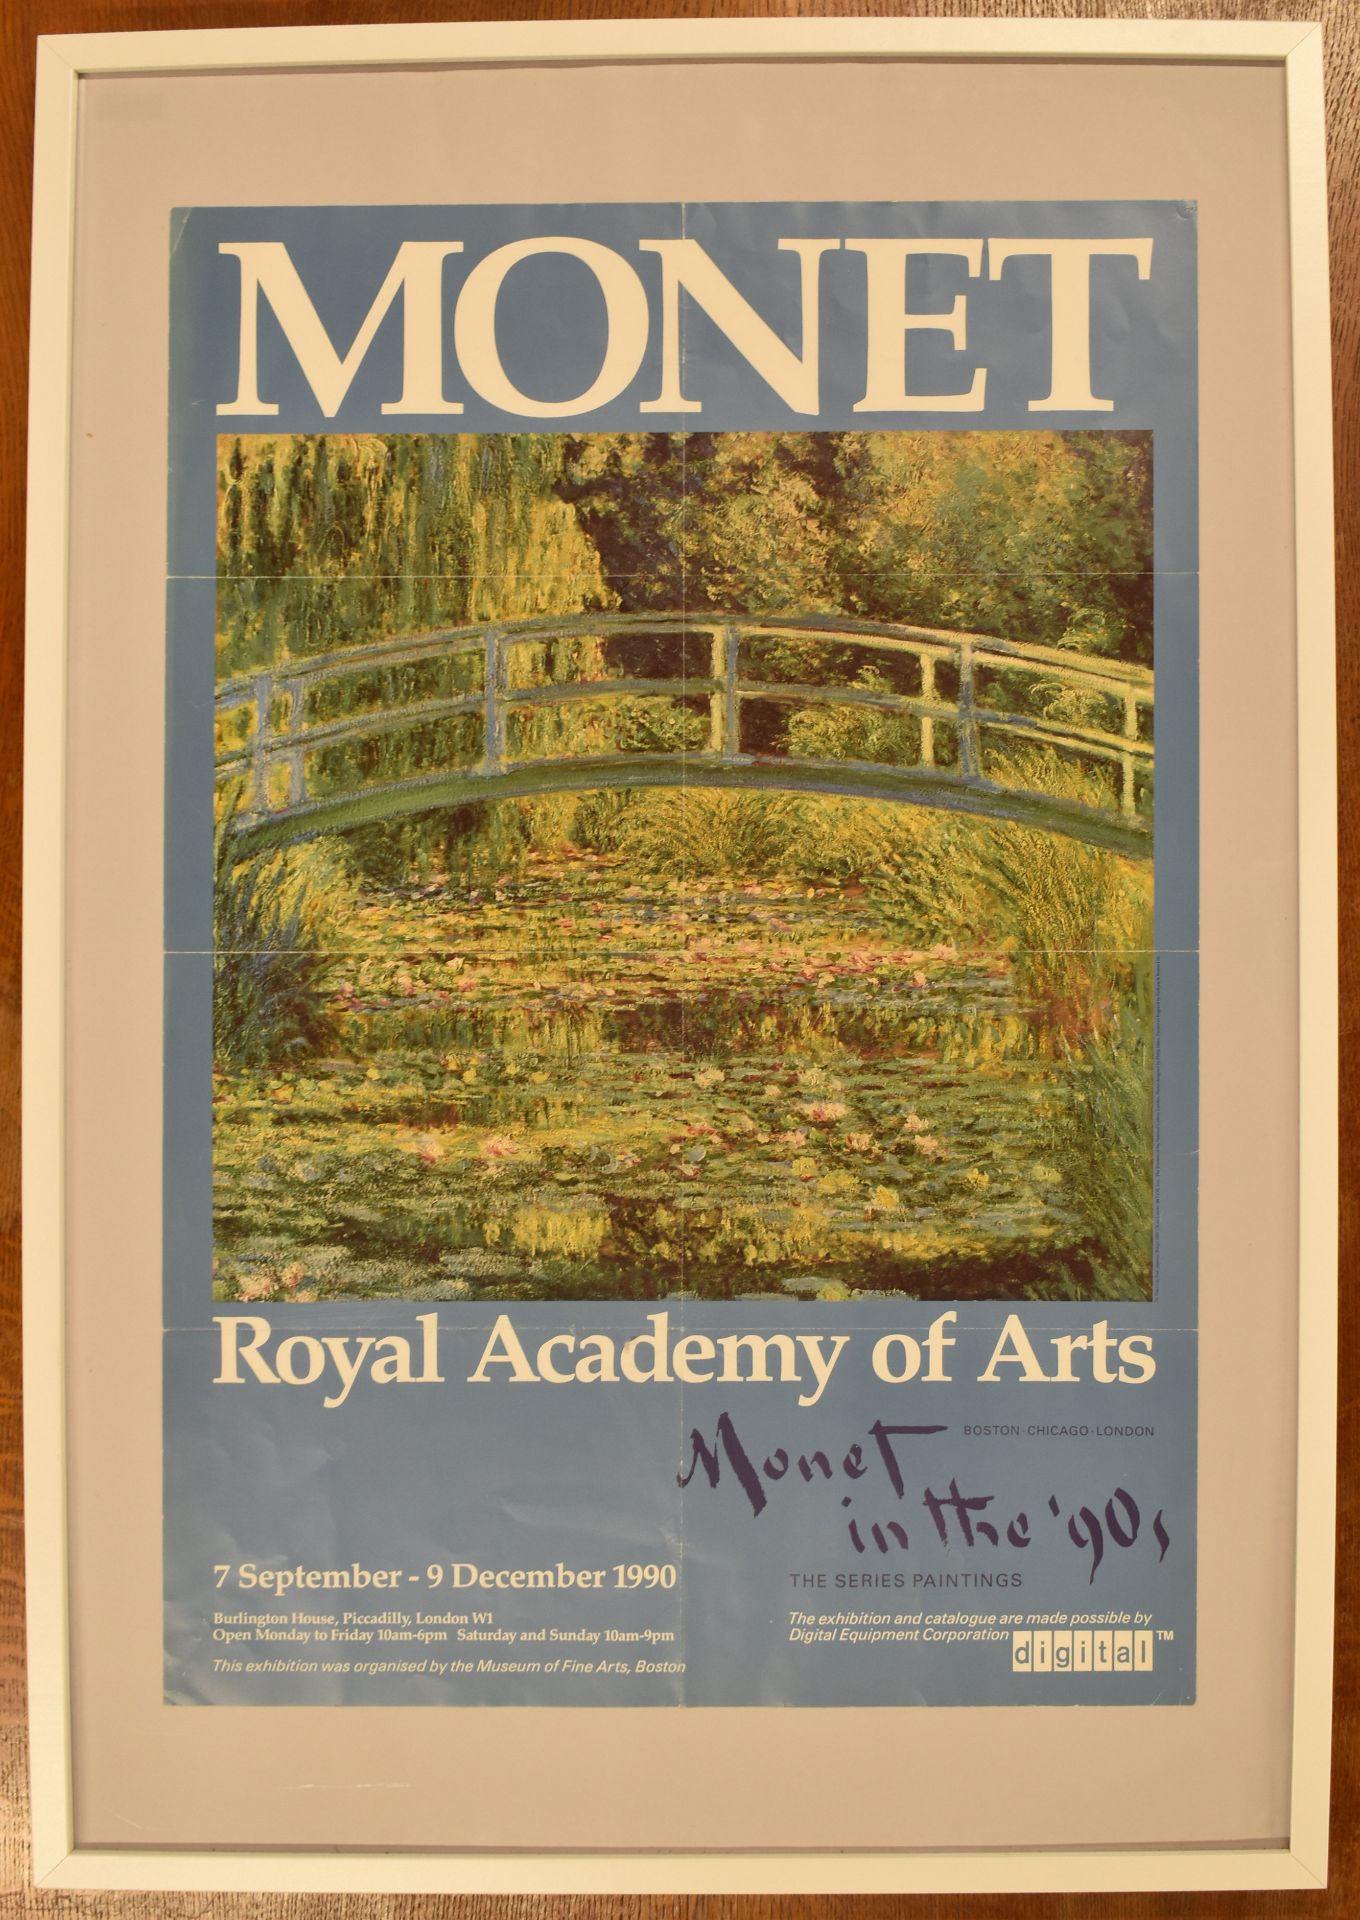 CLAUDE MONET - 1990 ROYAL ACADEMY OF ARTS EXHIBITION POSTER - Image 2 of 5